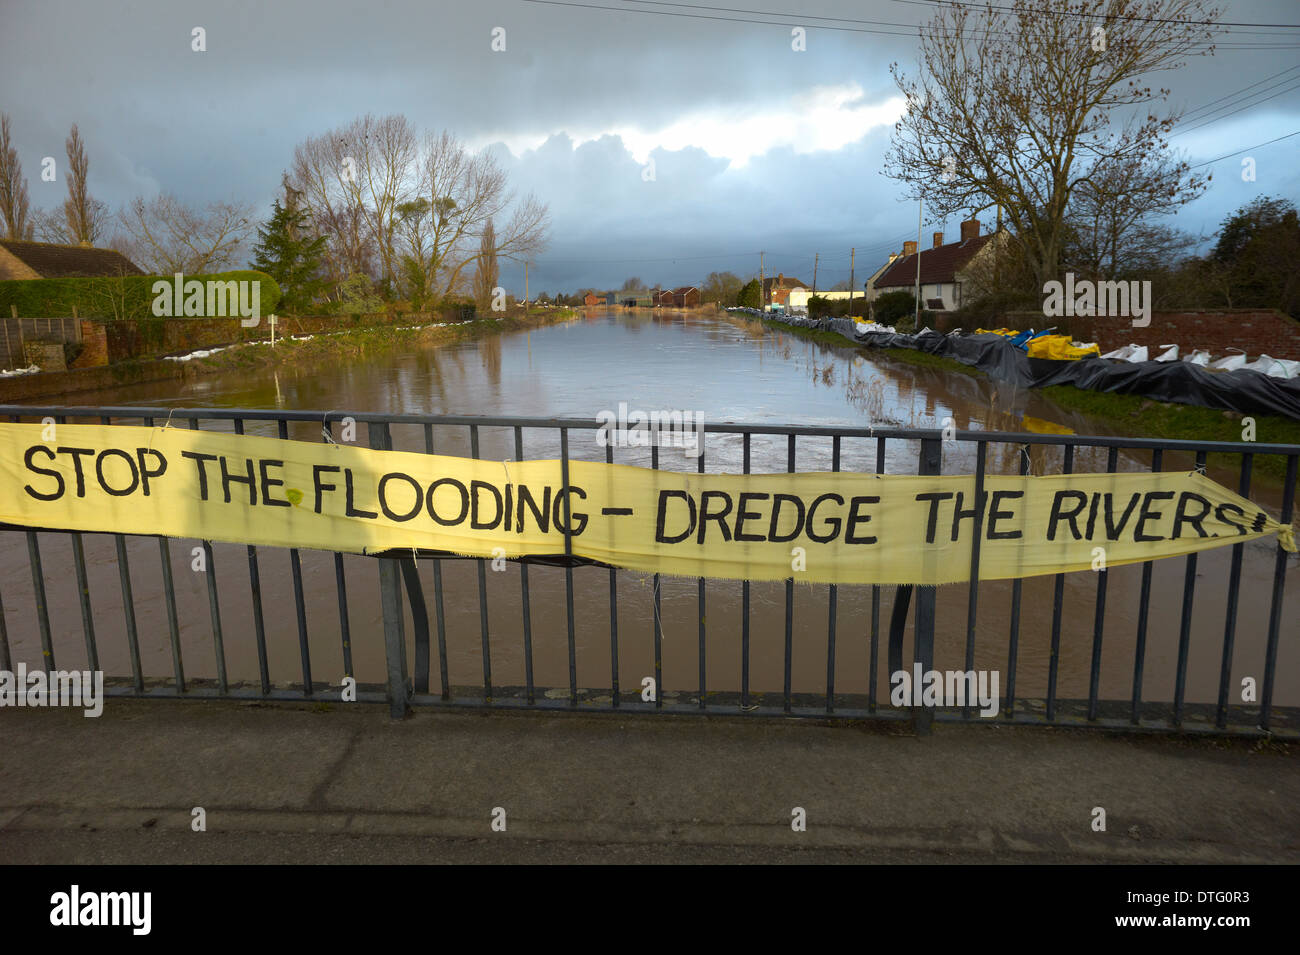 locals put banner on bridge over river parrot calling for it to be dredge to prevent flooding at Burrowbridge somerset levels. Stock Photo